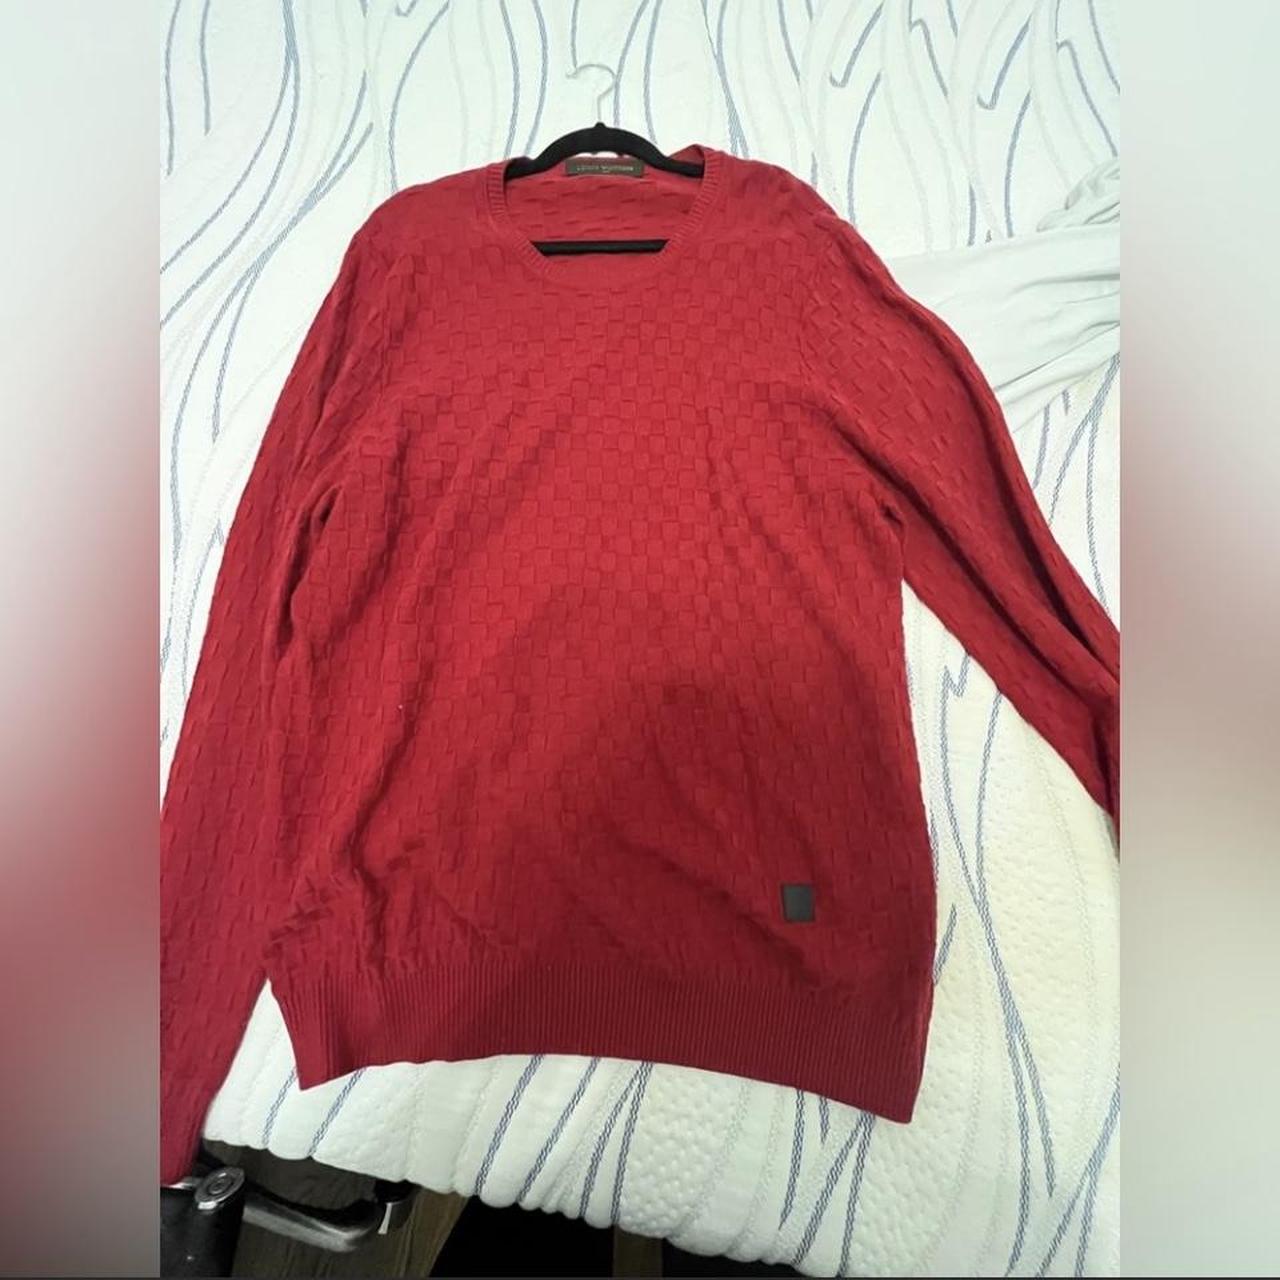 louis vuitton red sweater